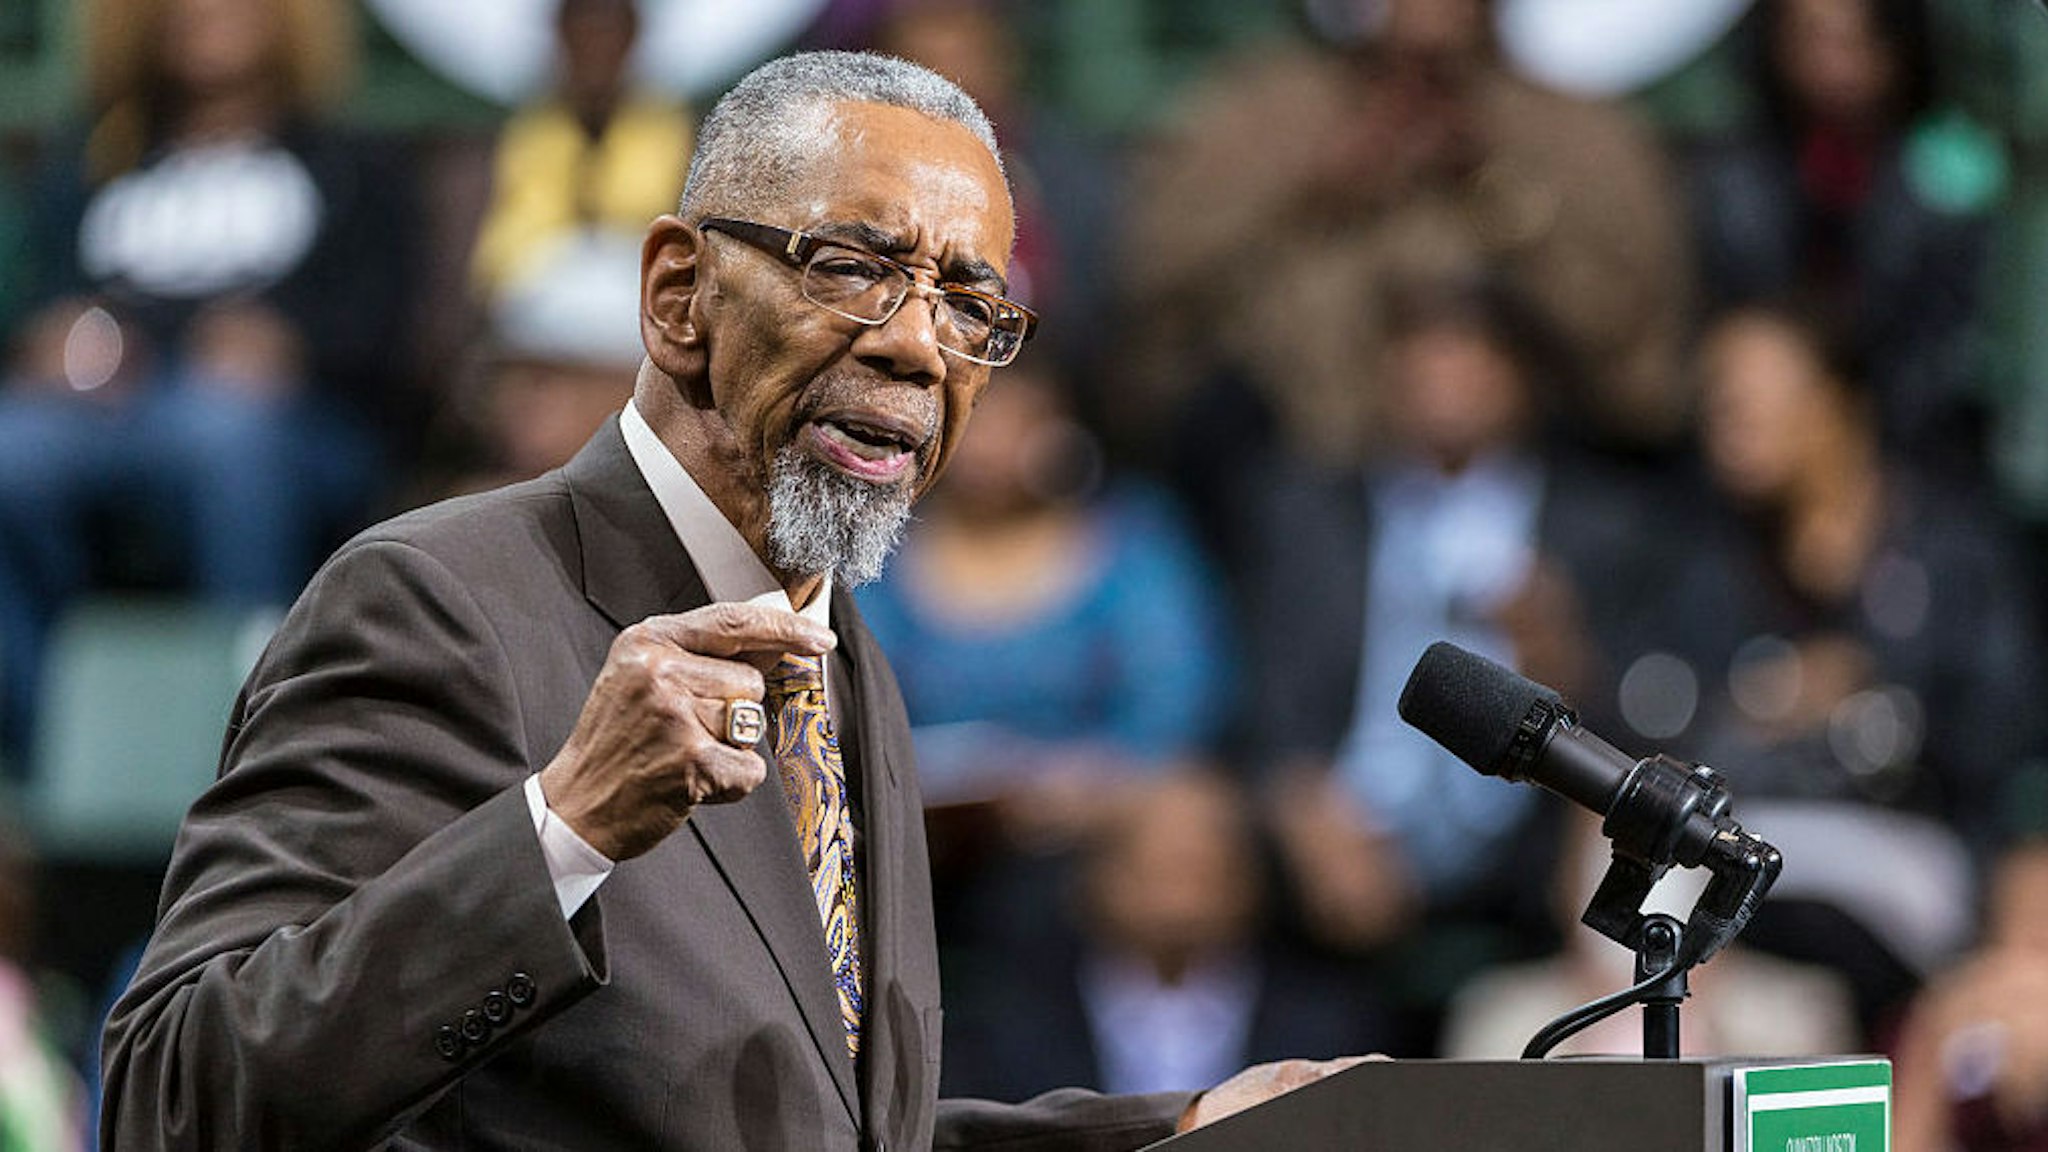 Illinois US Congressman Bobby Rush speaks to the crowd at a rally for Illinois Governor Pat Quinn at the Chicago State University Convocation Center on the South side of Chicago.